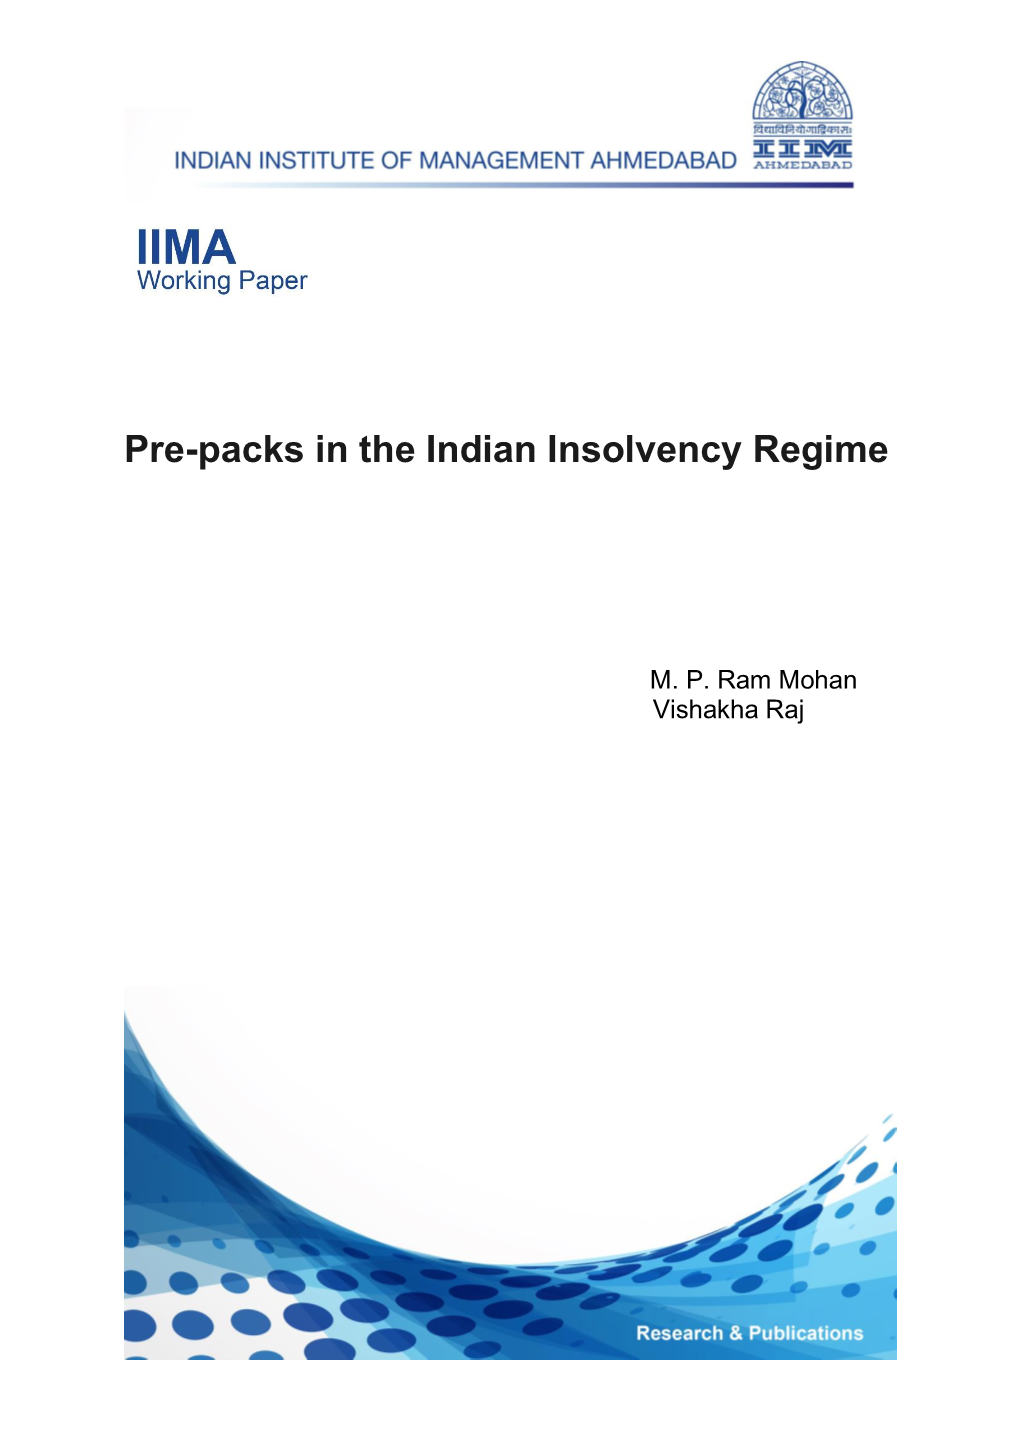 Pre-Packs in the Indian Insolvency Regime